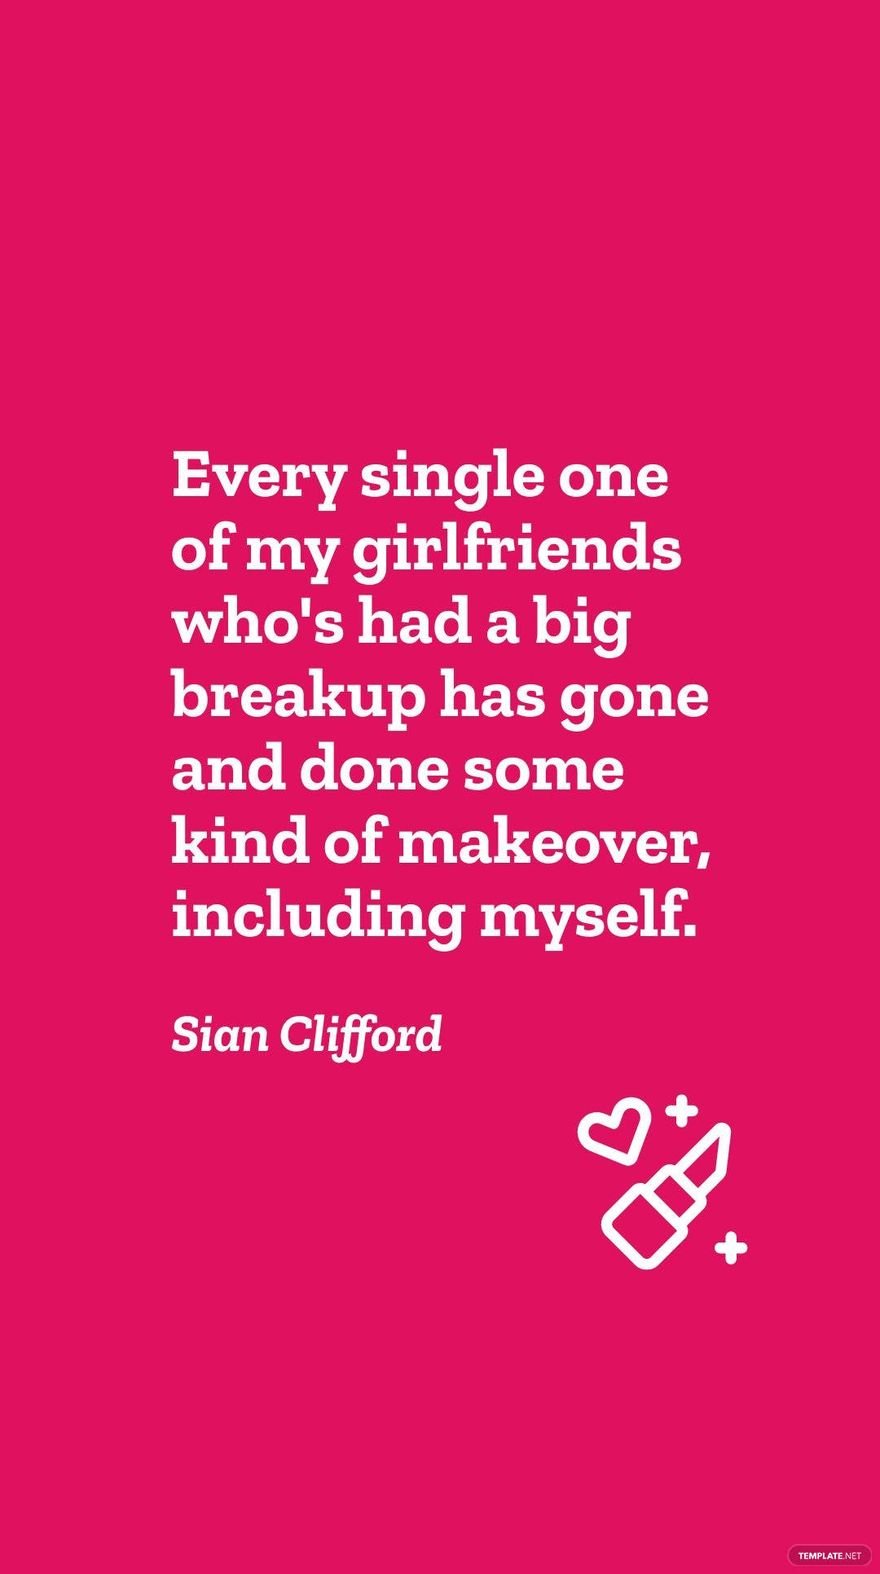 Sian Clifford - Every single one of my girlfriends who's had a big breakup has gone and done some kind of makeover, including myself.